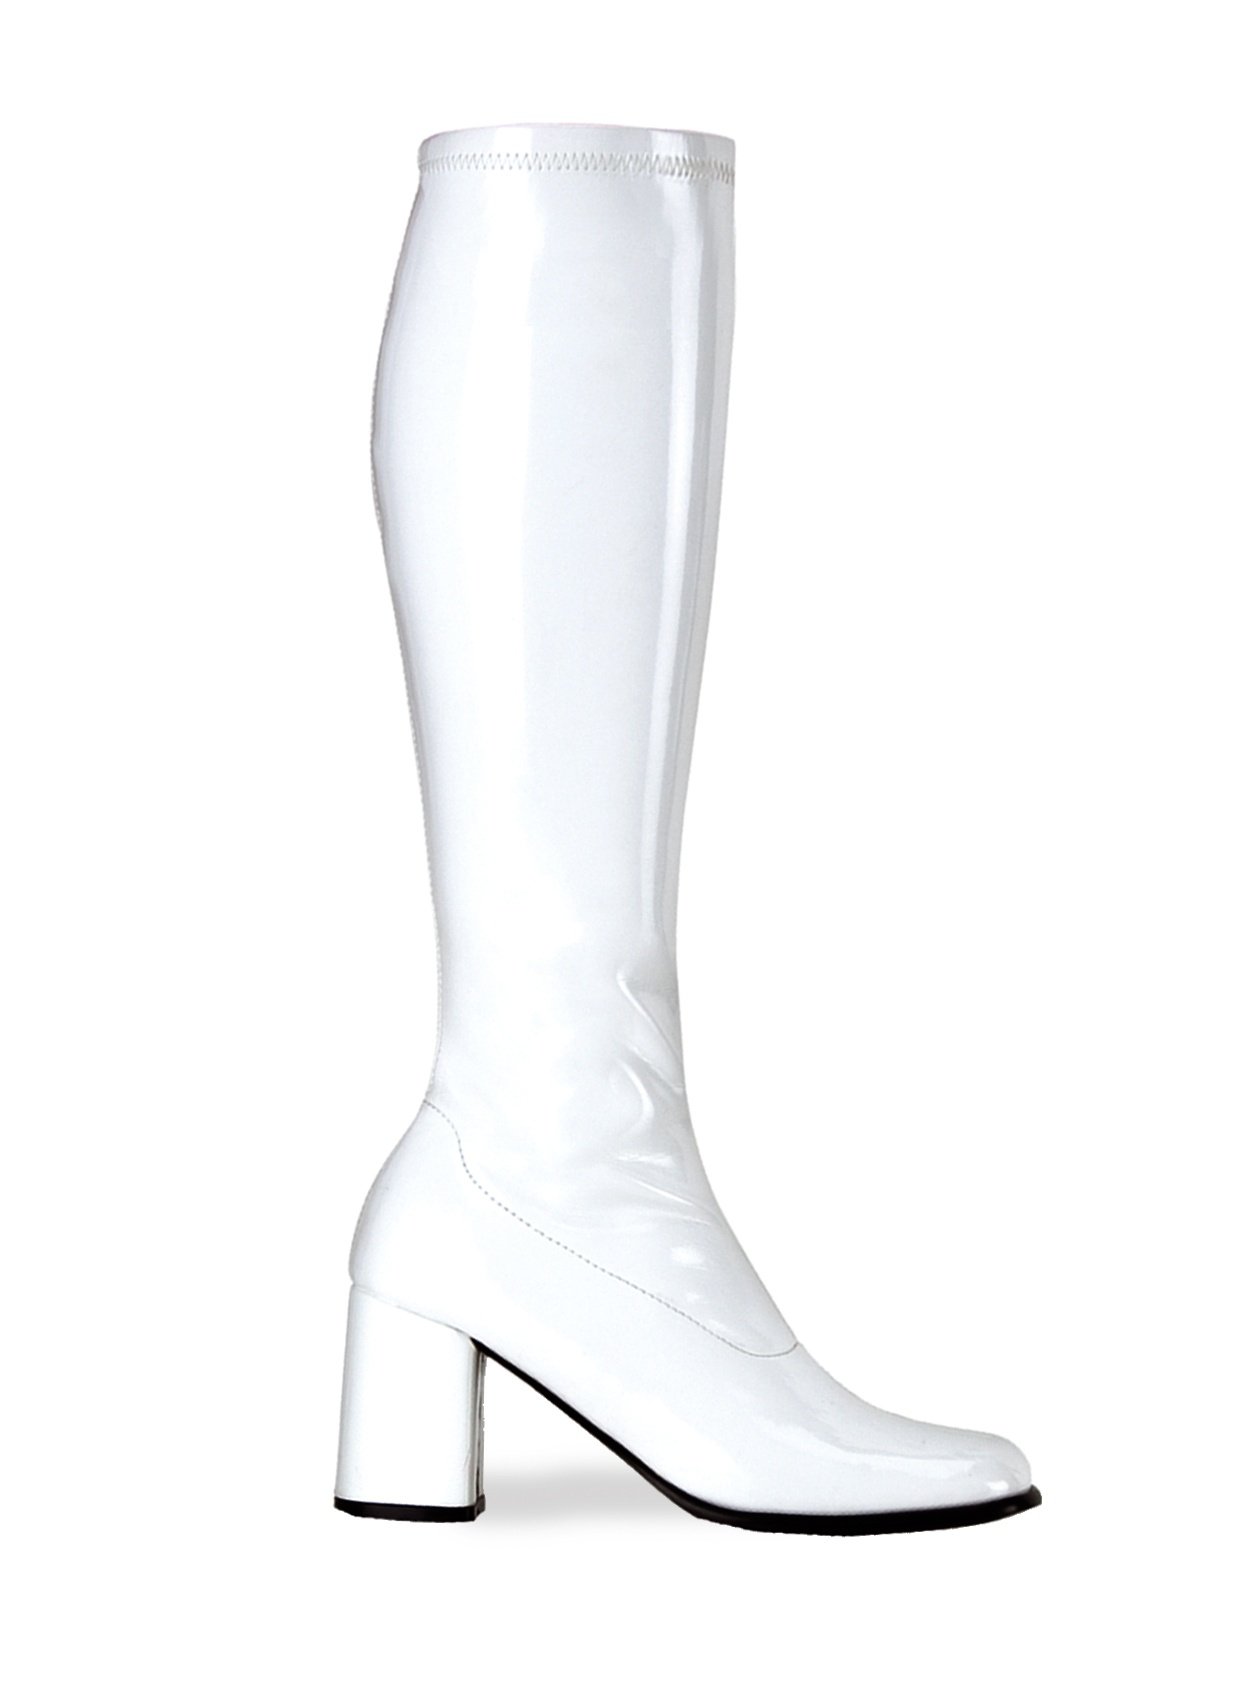 https://i.mmo.cm/is/image/mmoimg/mmo-markets/103963-retro-stretchlack-stiefel-weiss-vinyl-boots-white.jpg